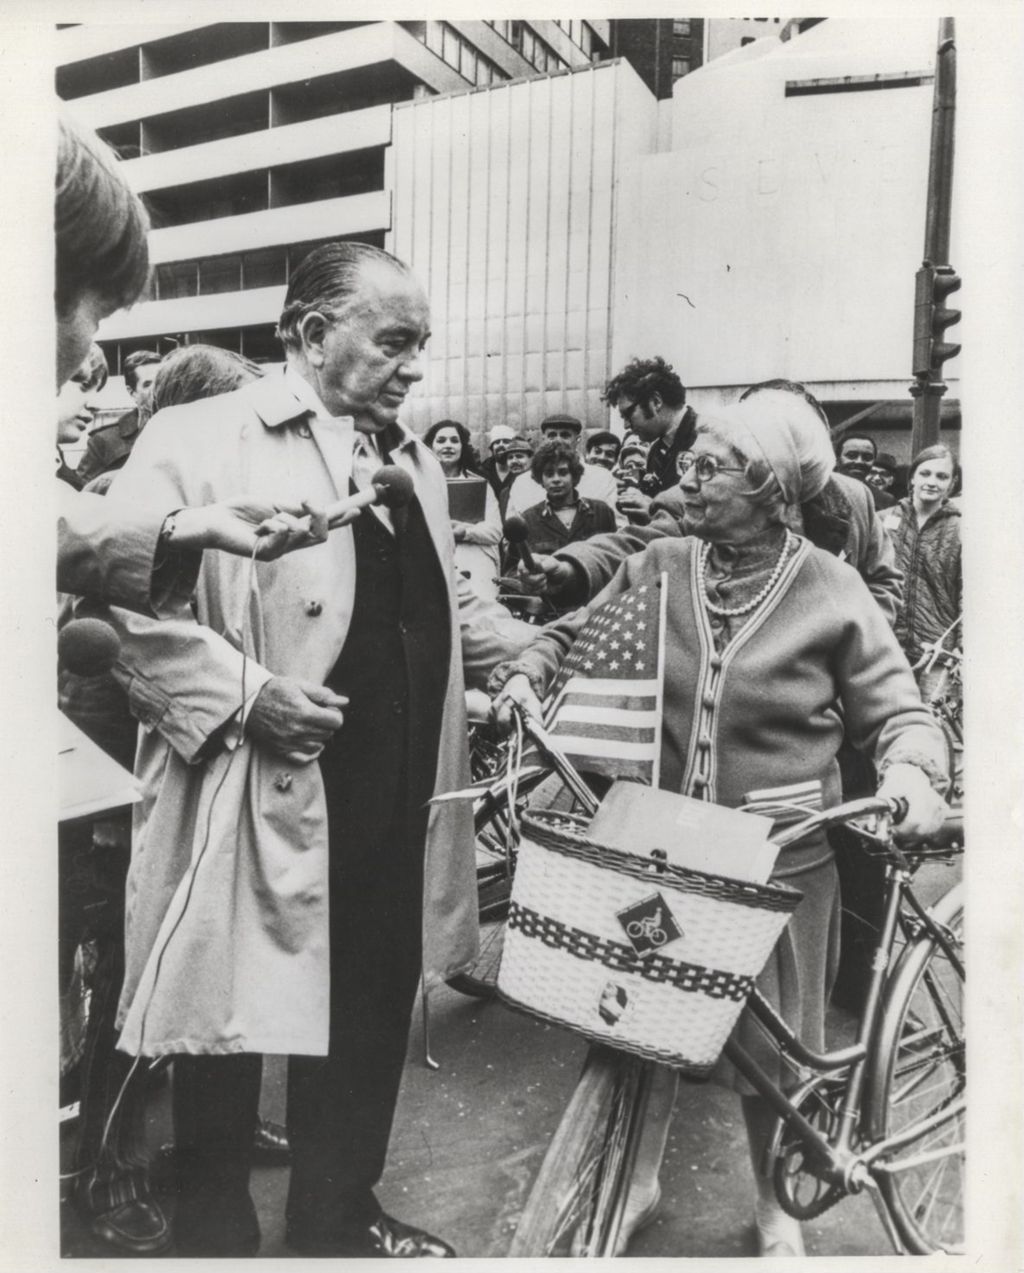 Miniature of Richard J. Daley standing with a woman with a bicycle